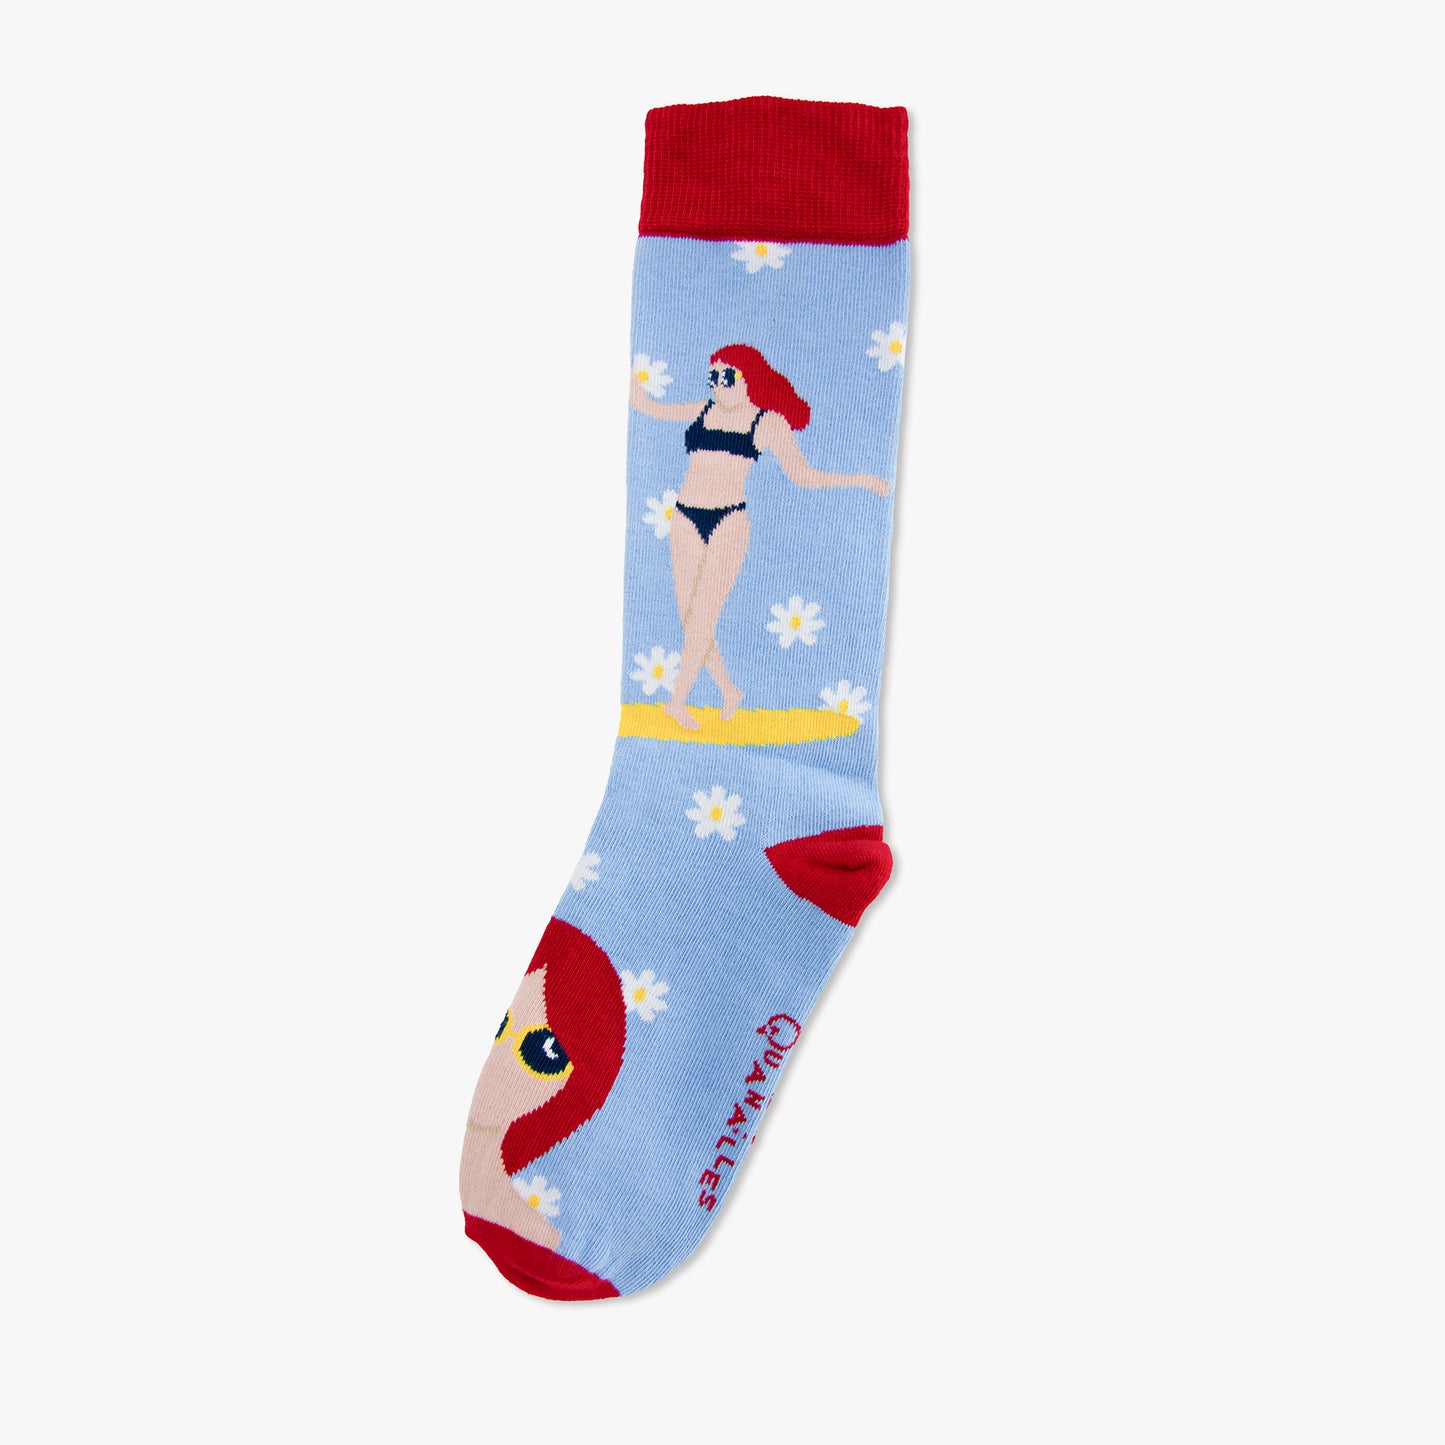 Chaussettes made in france surf femme jour bleu rouge lune